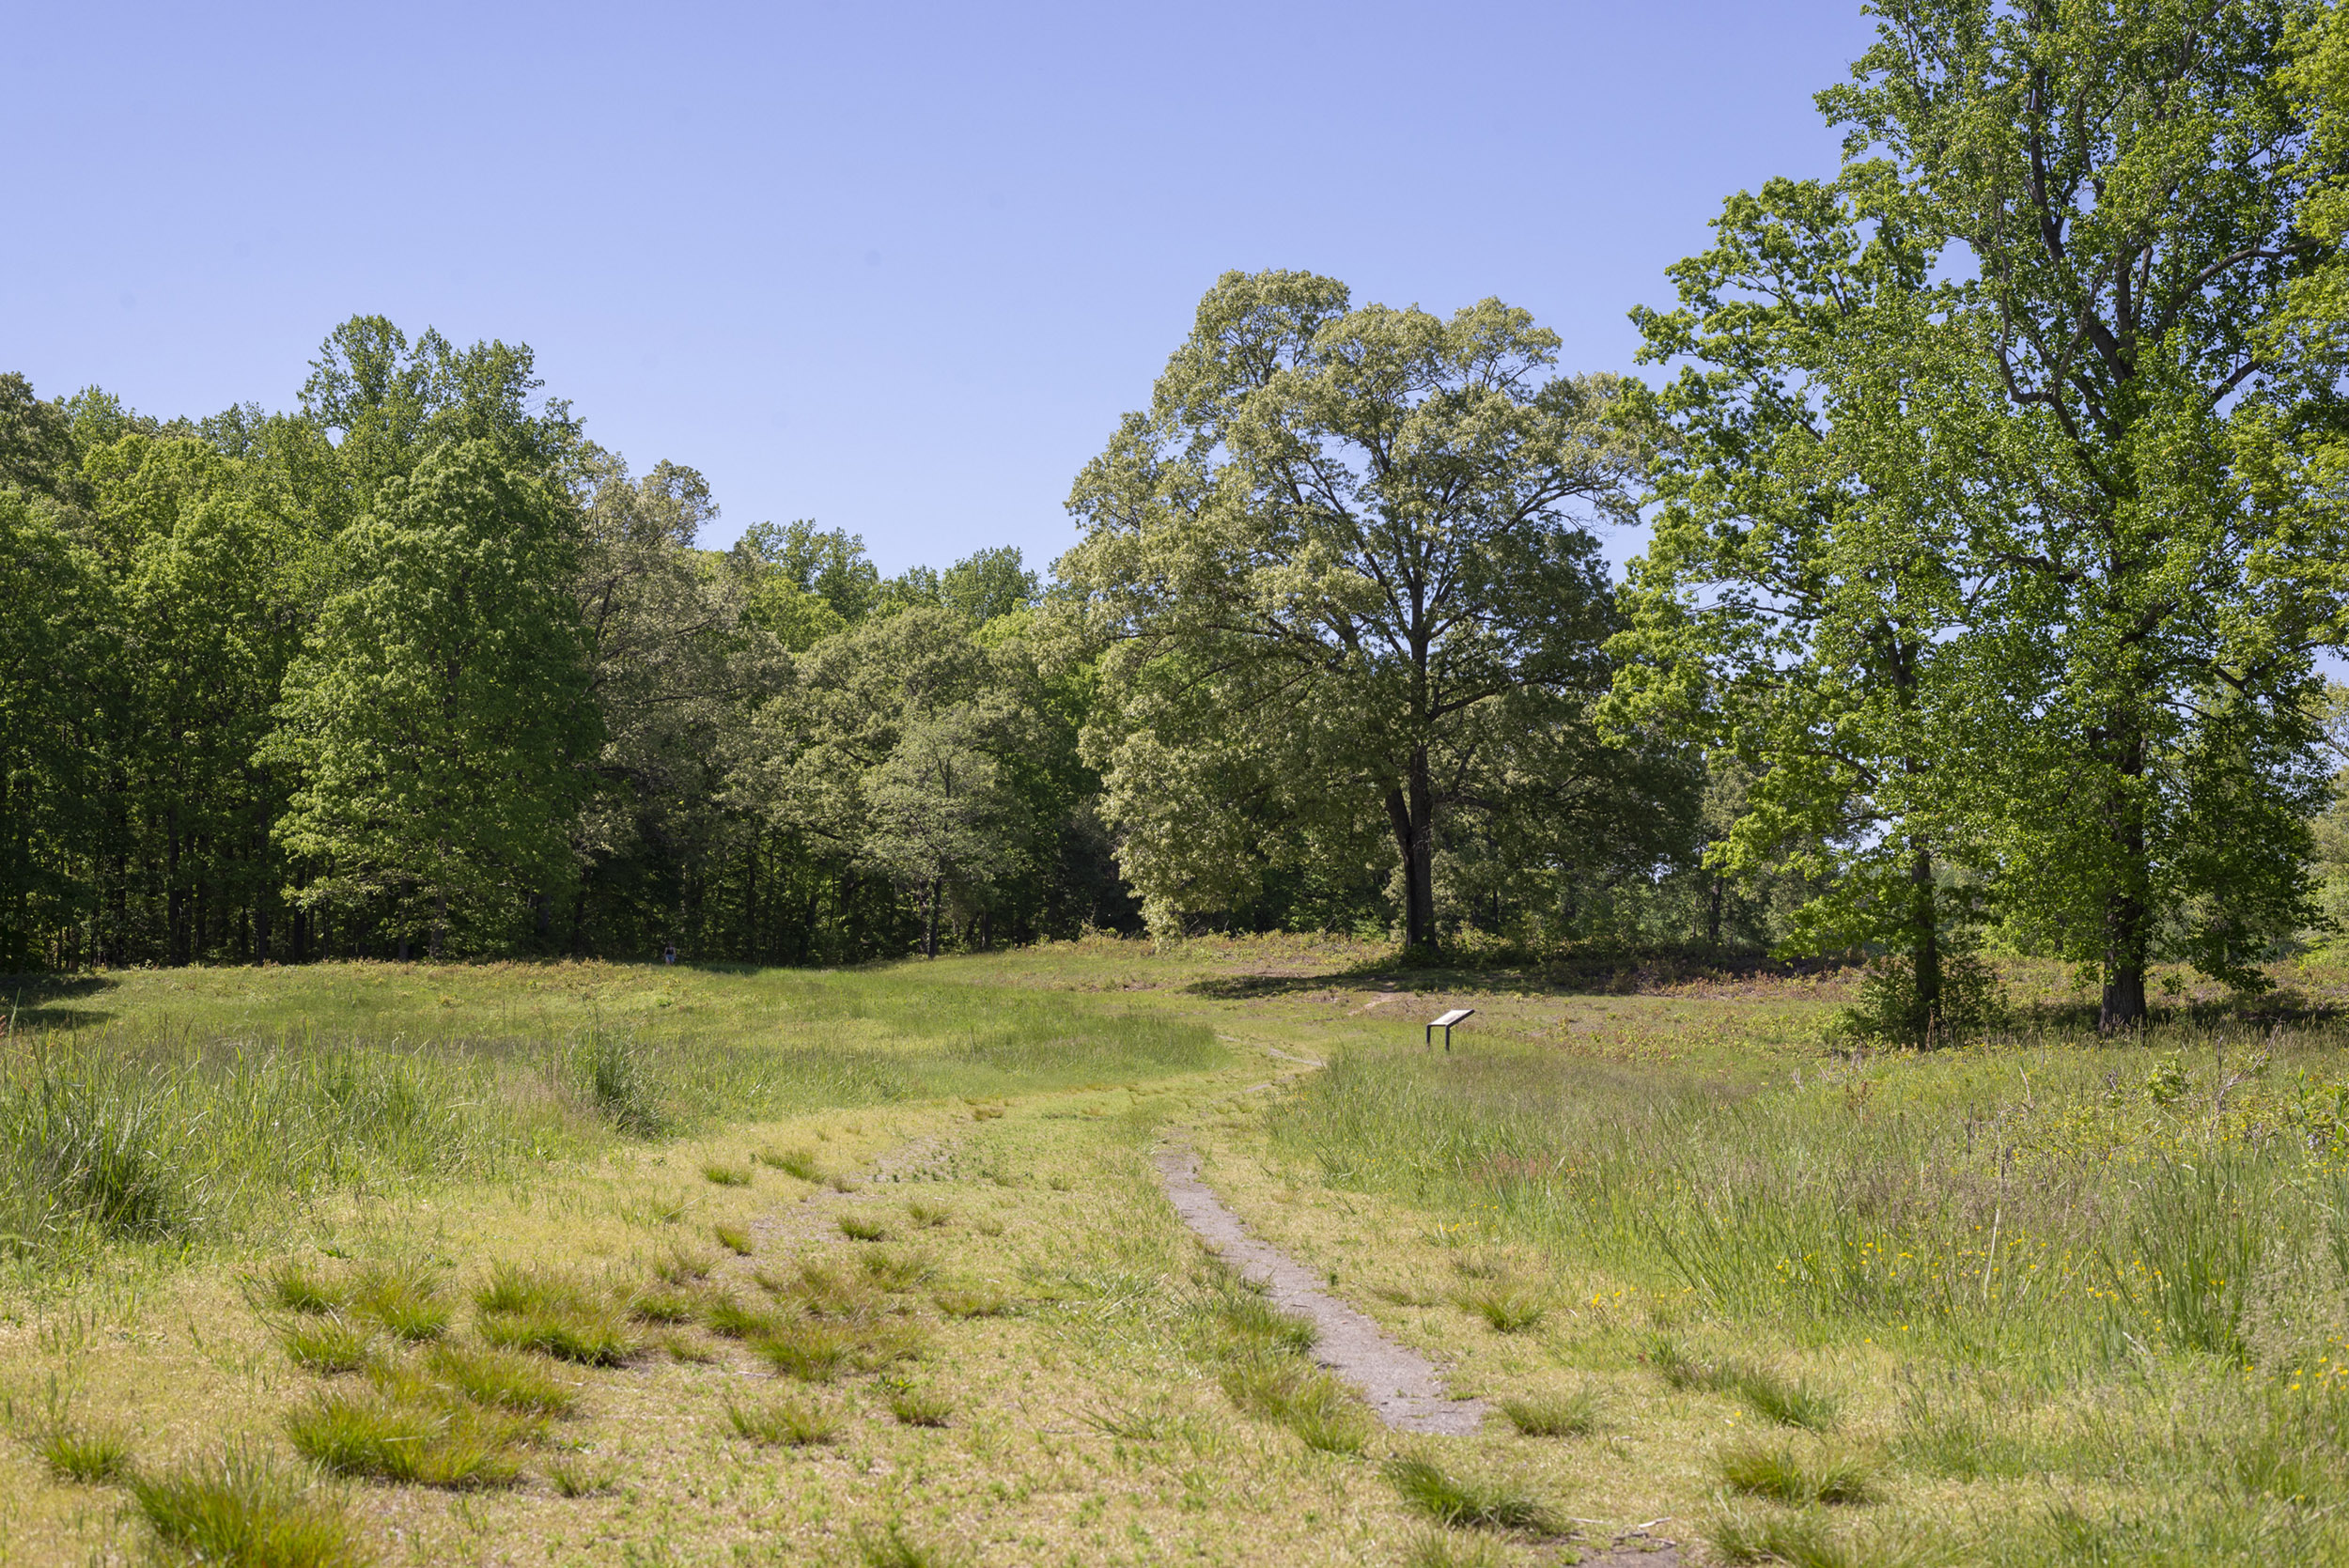 A path with grass growing around it leading to a tree line.